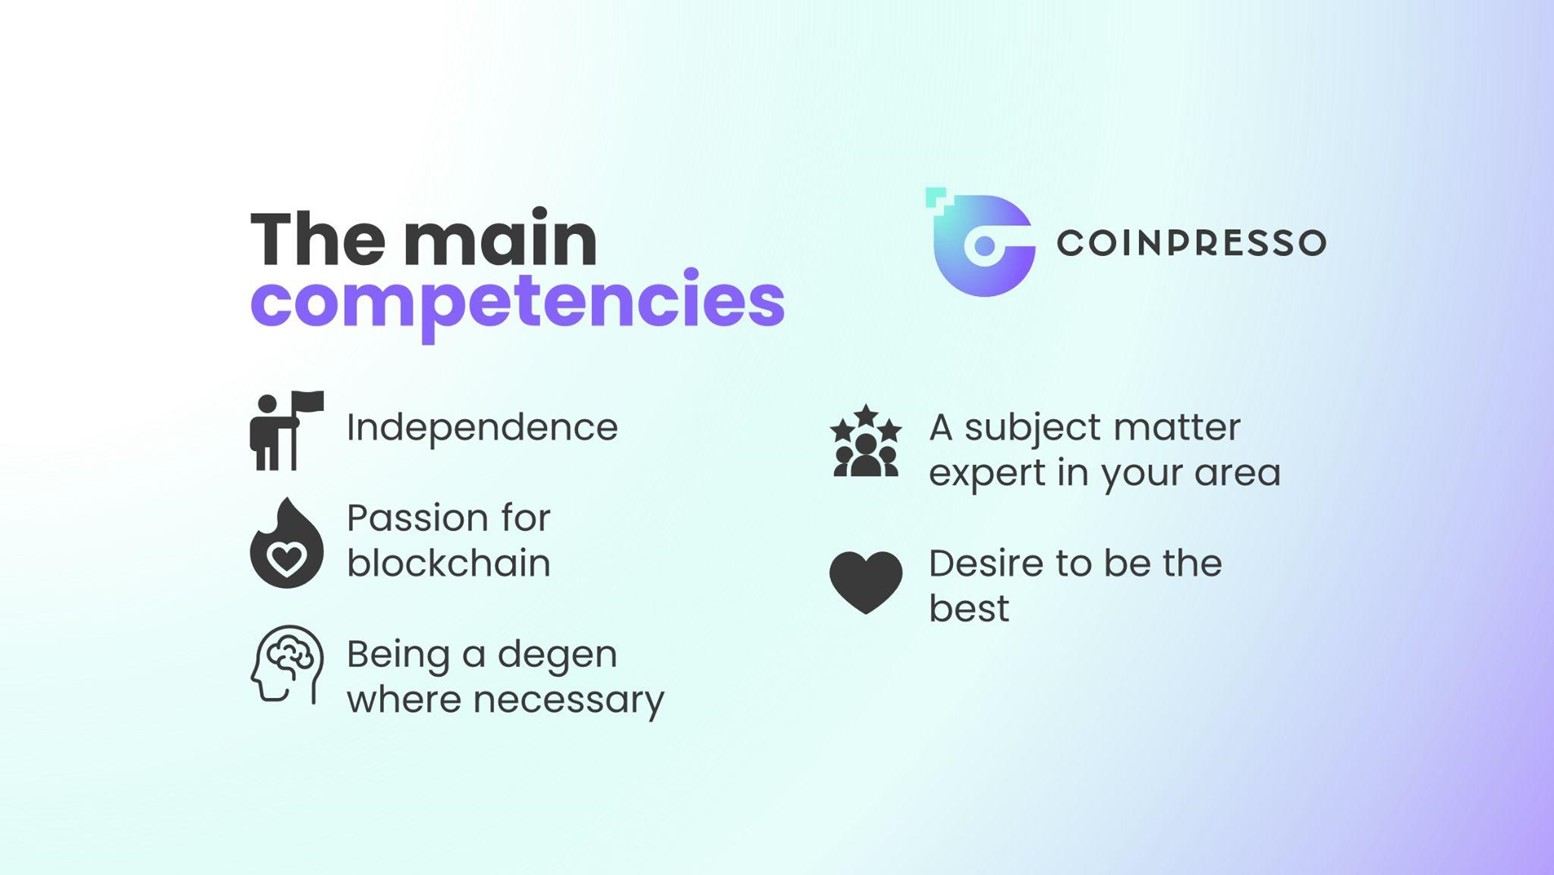 The main competencies